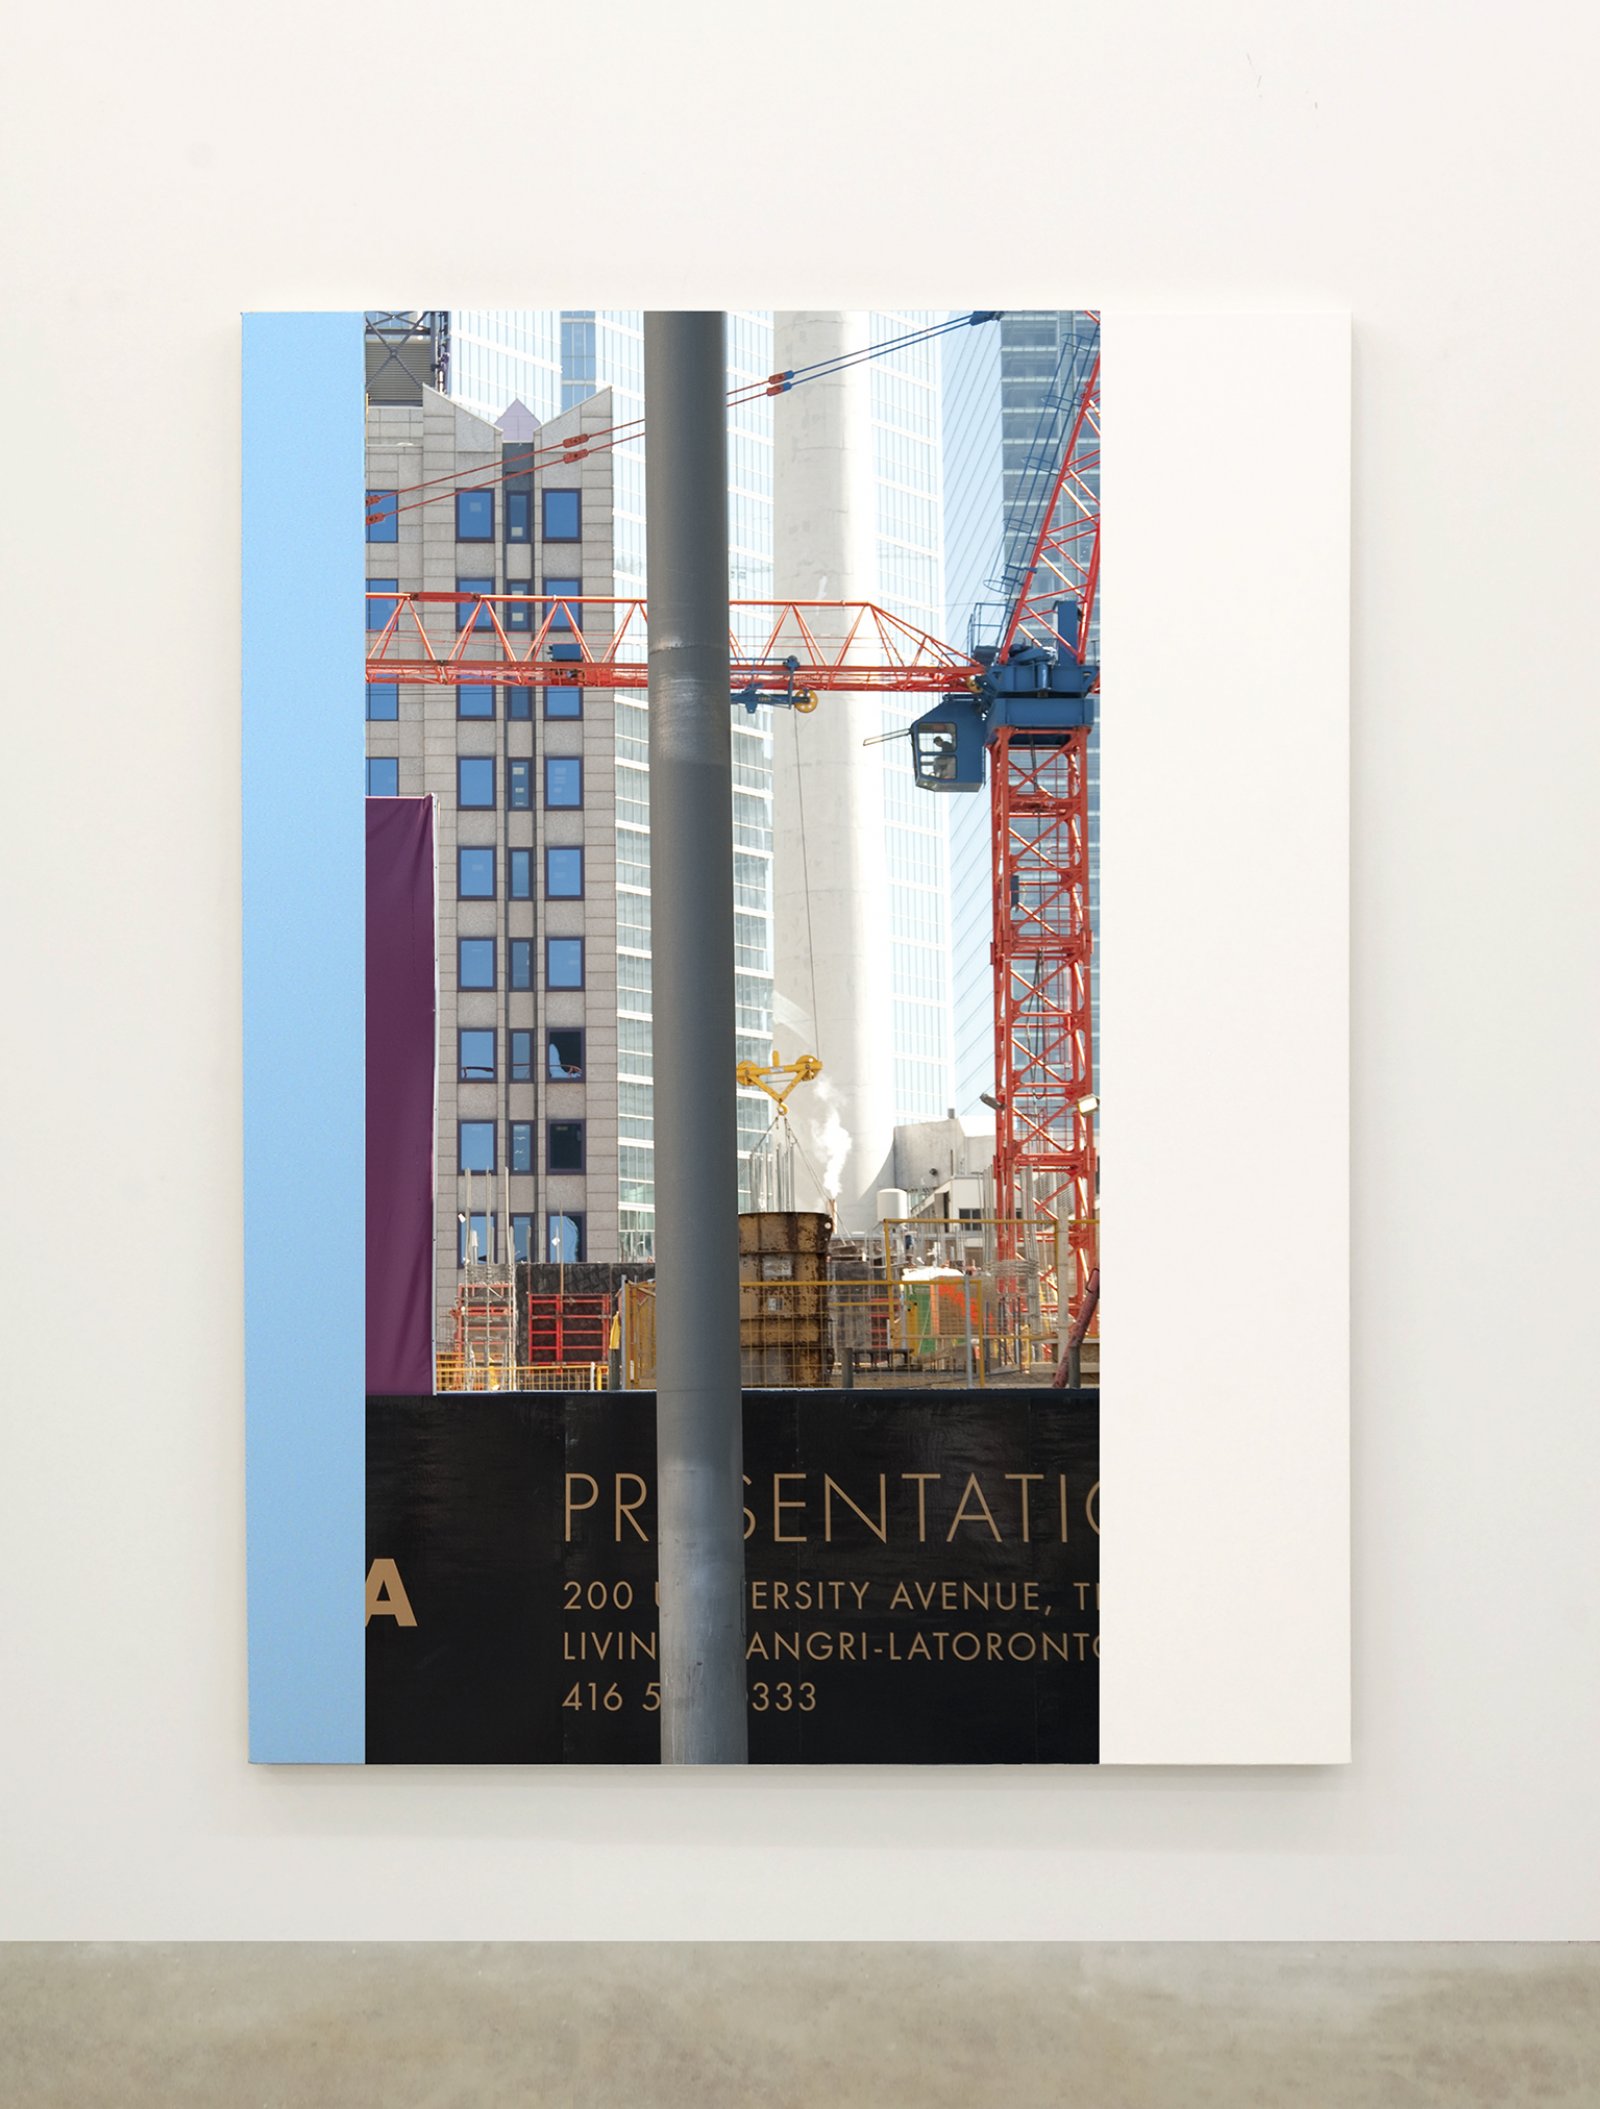 Ian Wallace, Abstract Painting V (The Financial District), 2010, 12 photolaminate with acrylic on canvas panels, each 96 x 72 in. (244 x 183 cm)